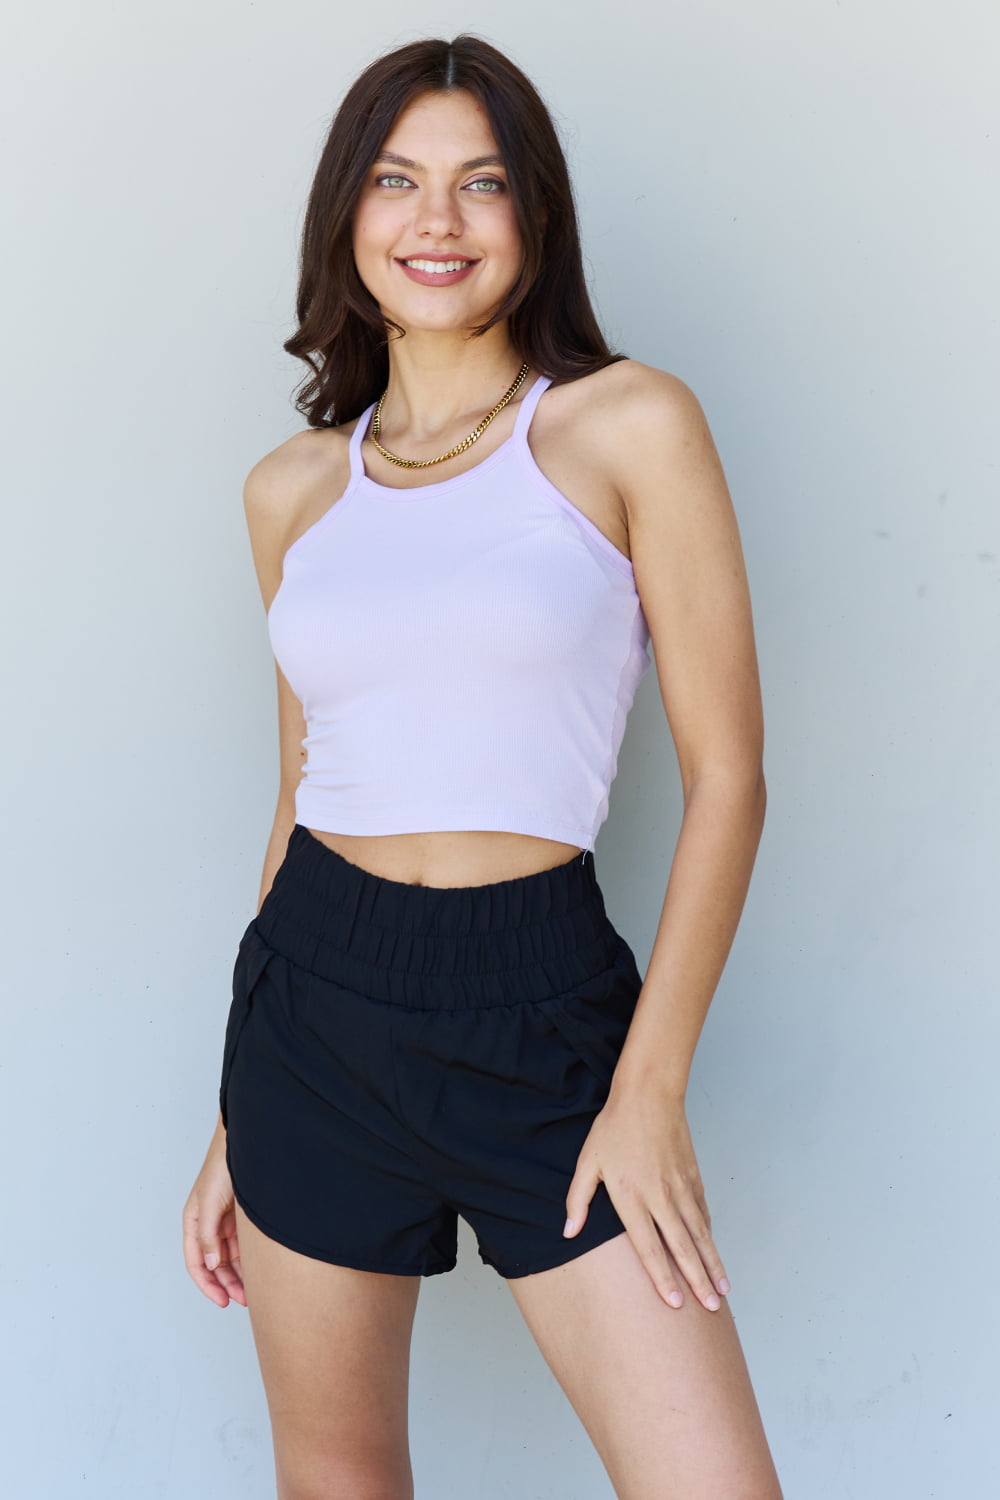 Gray Ninexis Everyday Staple Soft Modal Short Strap Ribbed Tank Top in Lavender Sentient Beauty Fashions Apparel & Accessories